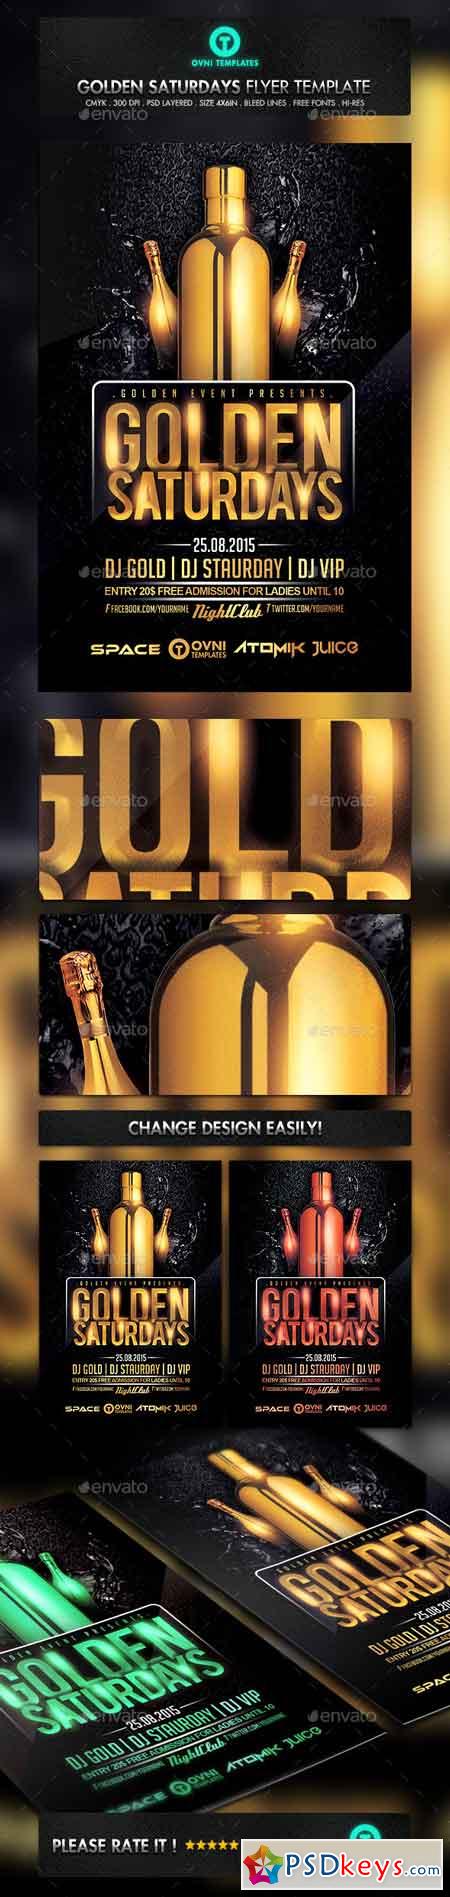 Gold Classy Drink Flyer Template 11045915